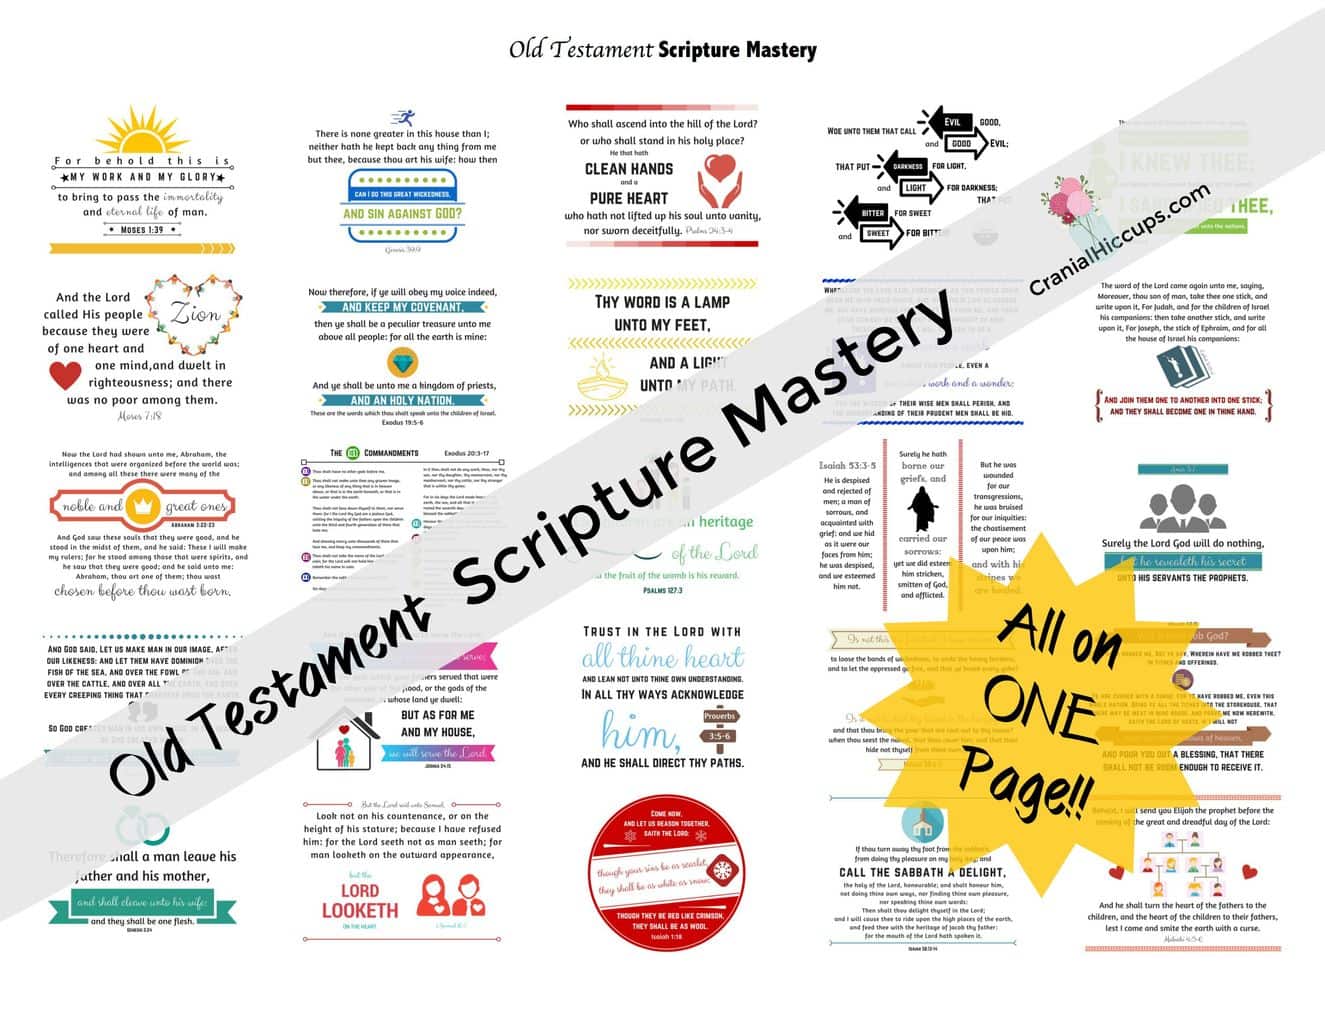 Old Testament Scripture Mastery verses all on one page! Great for seminary classes. Use for games or quick reference.